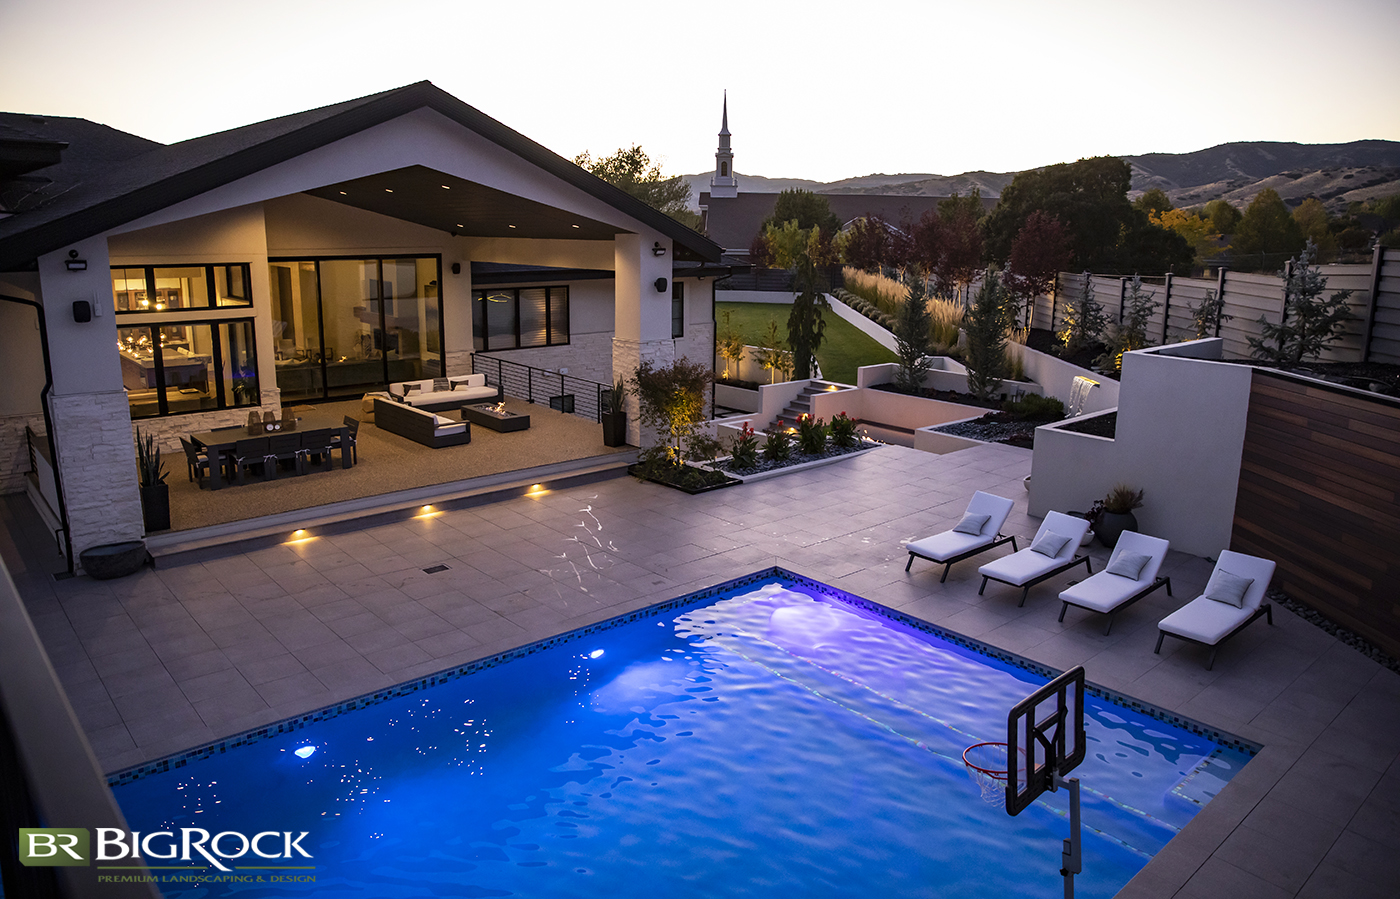 Make night swimming in your luxury pool a new activity with well designed pool lighting around your landscape.